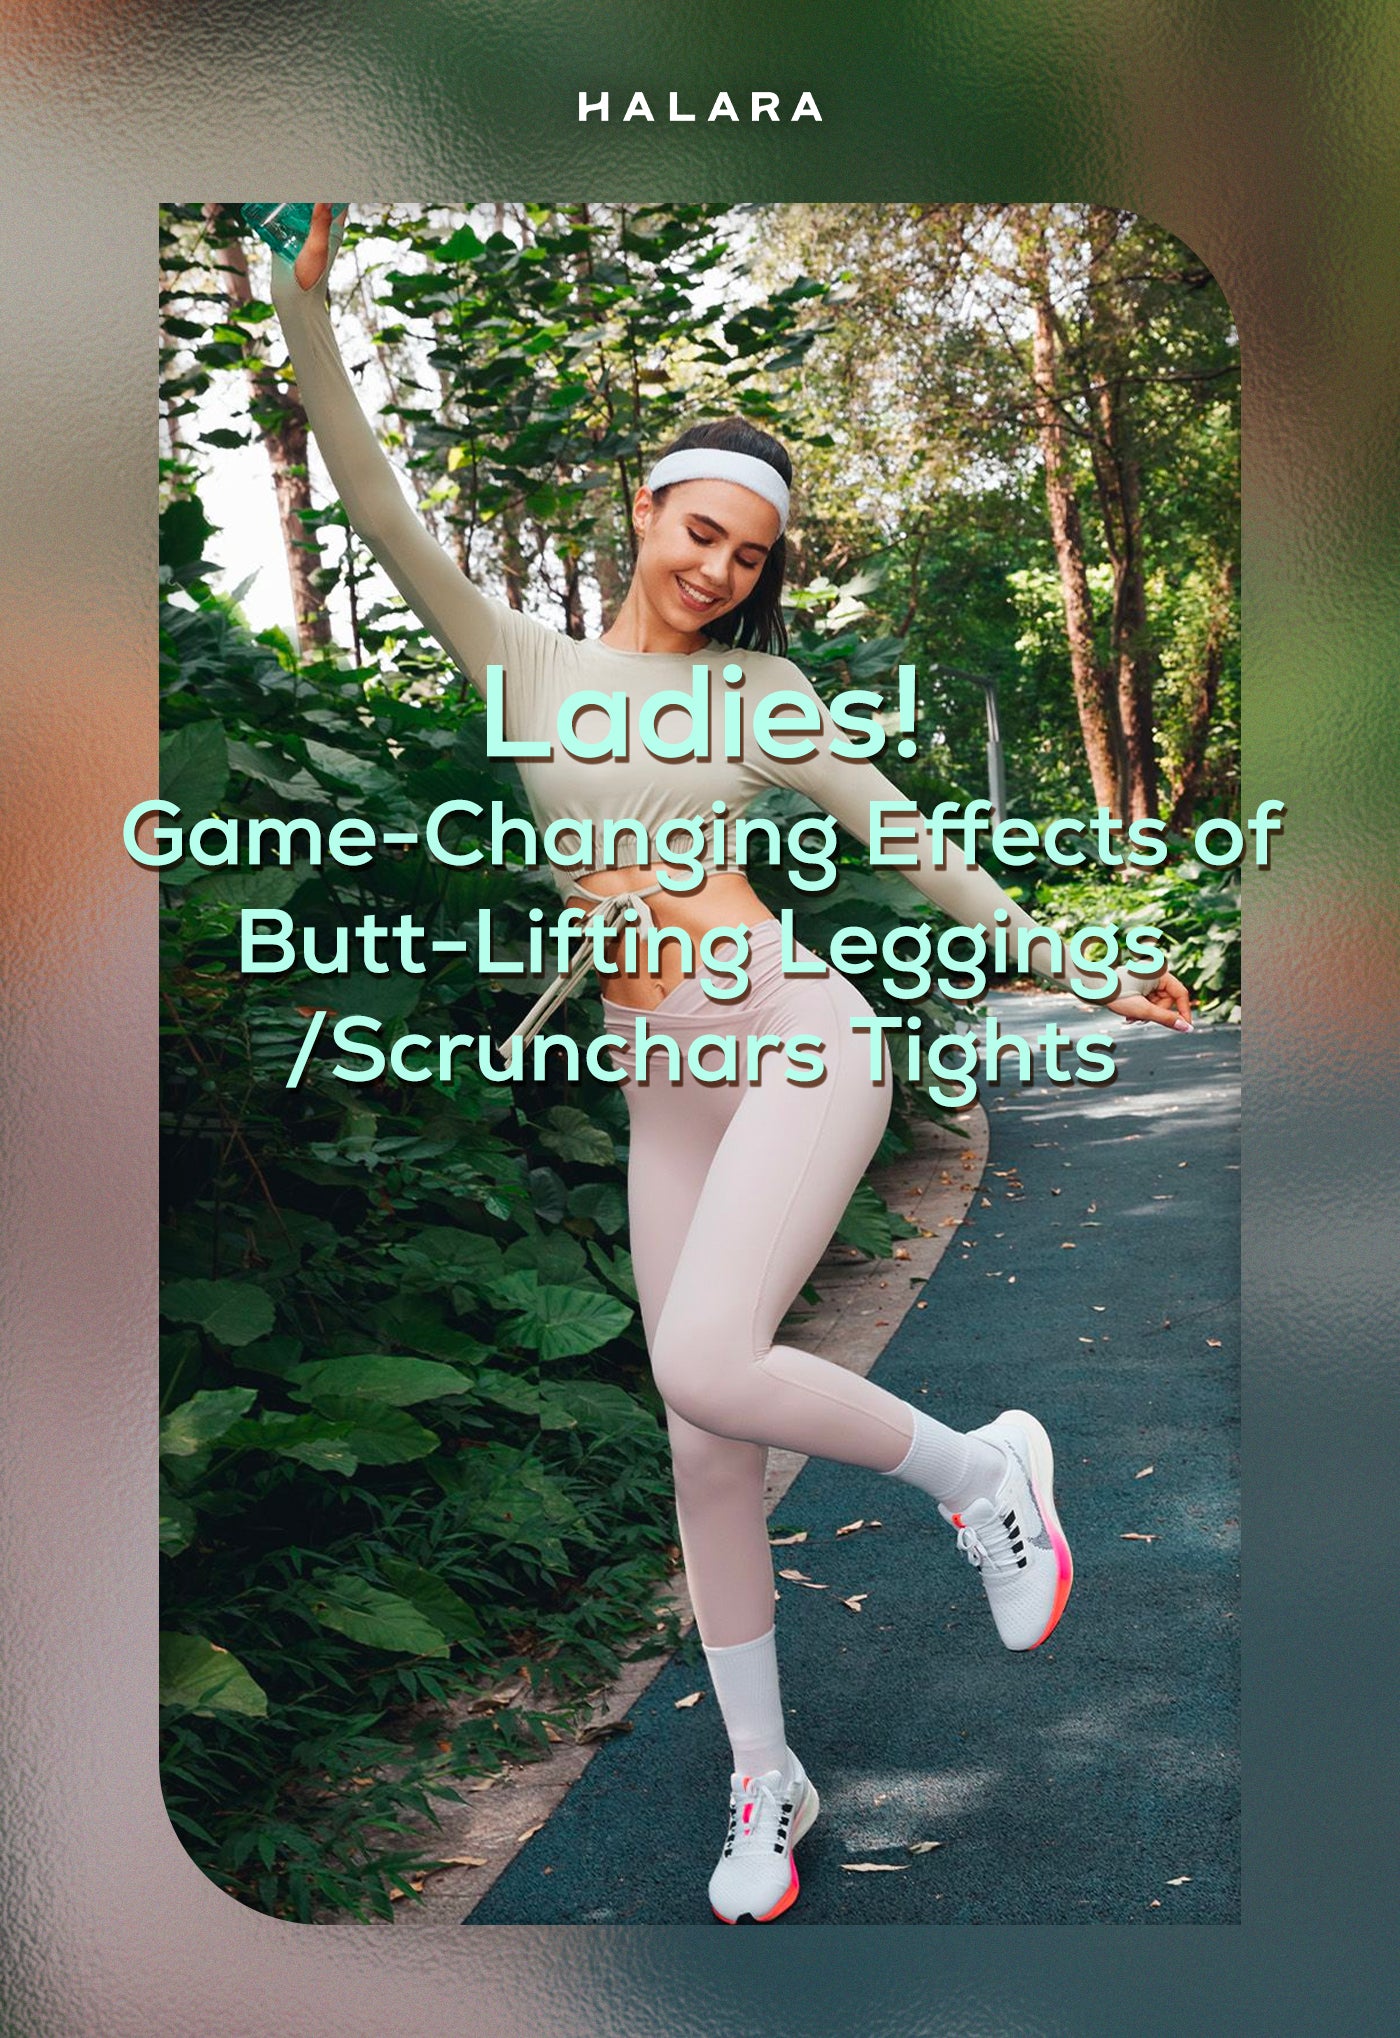 Ladies! Game-Changing Effects of Butt-Lifting Leggings/Scrunchars